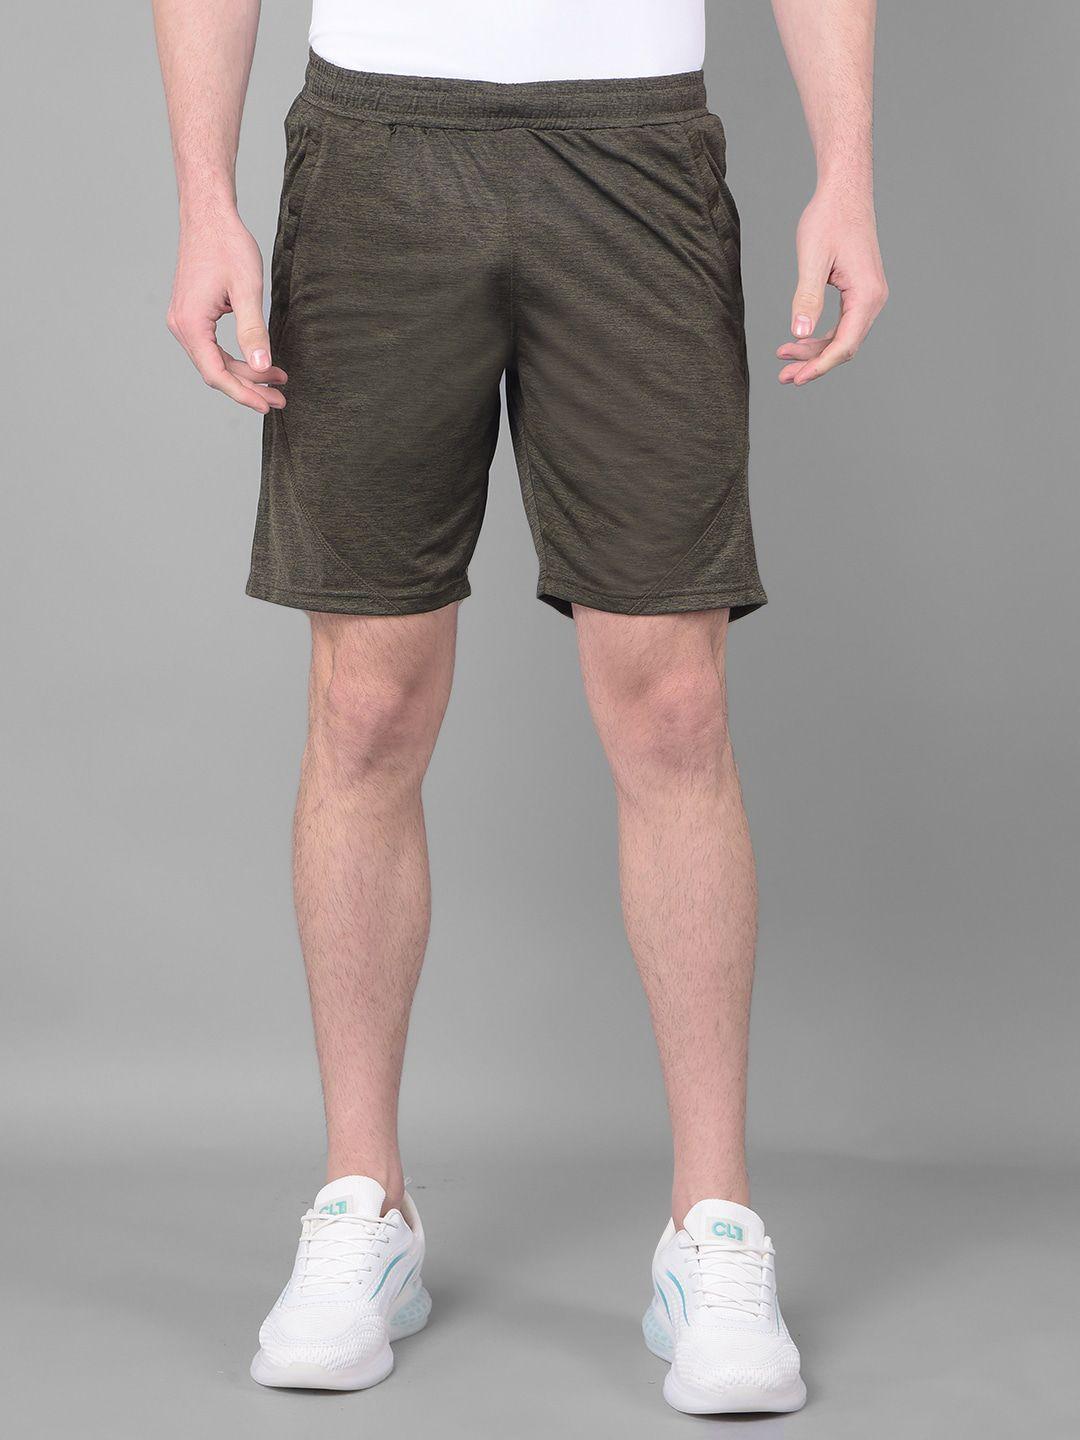 force-nxt-men-mid-rise-antimicrobial-technology-sports-shorts